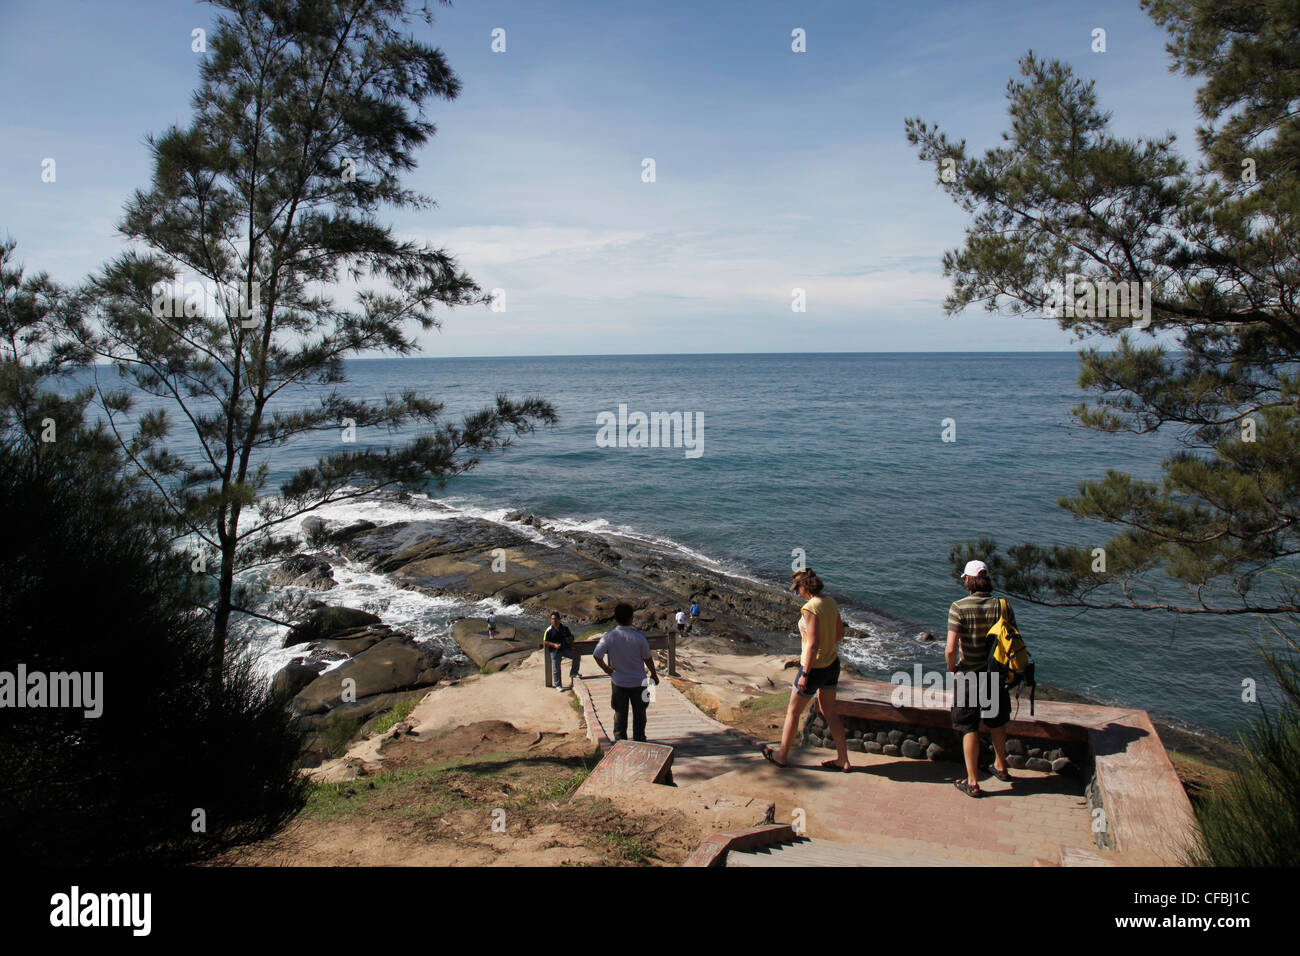 Tourists visiting the Tip of Borneo in Borneo, Malaysia Stock Photo